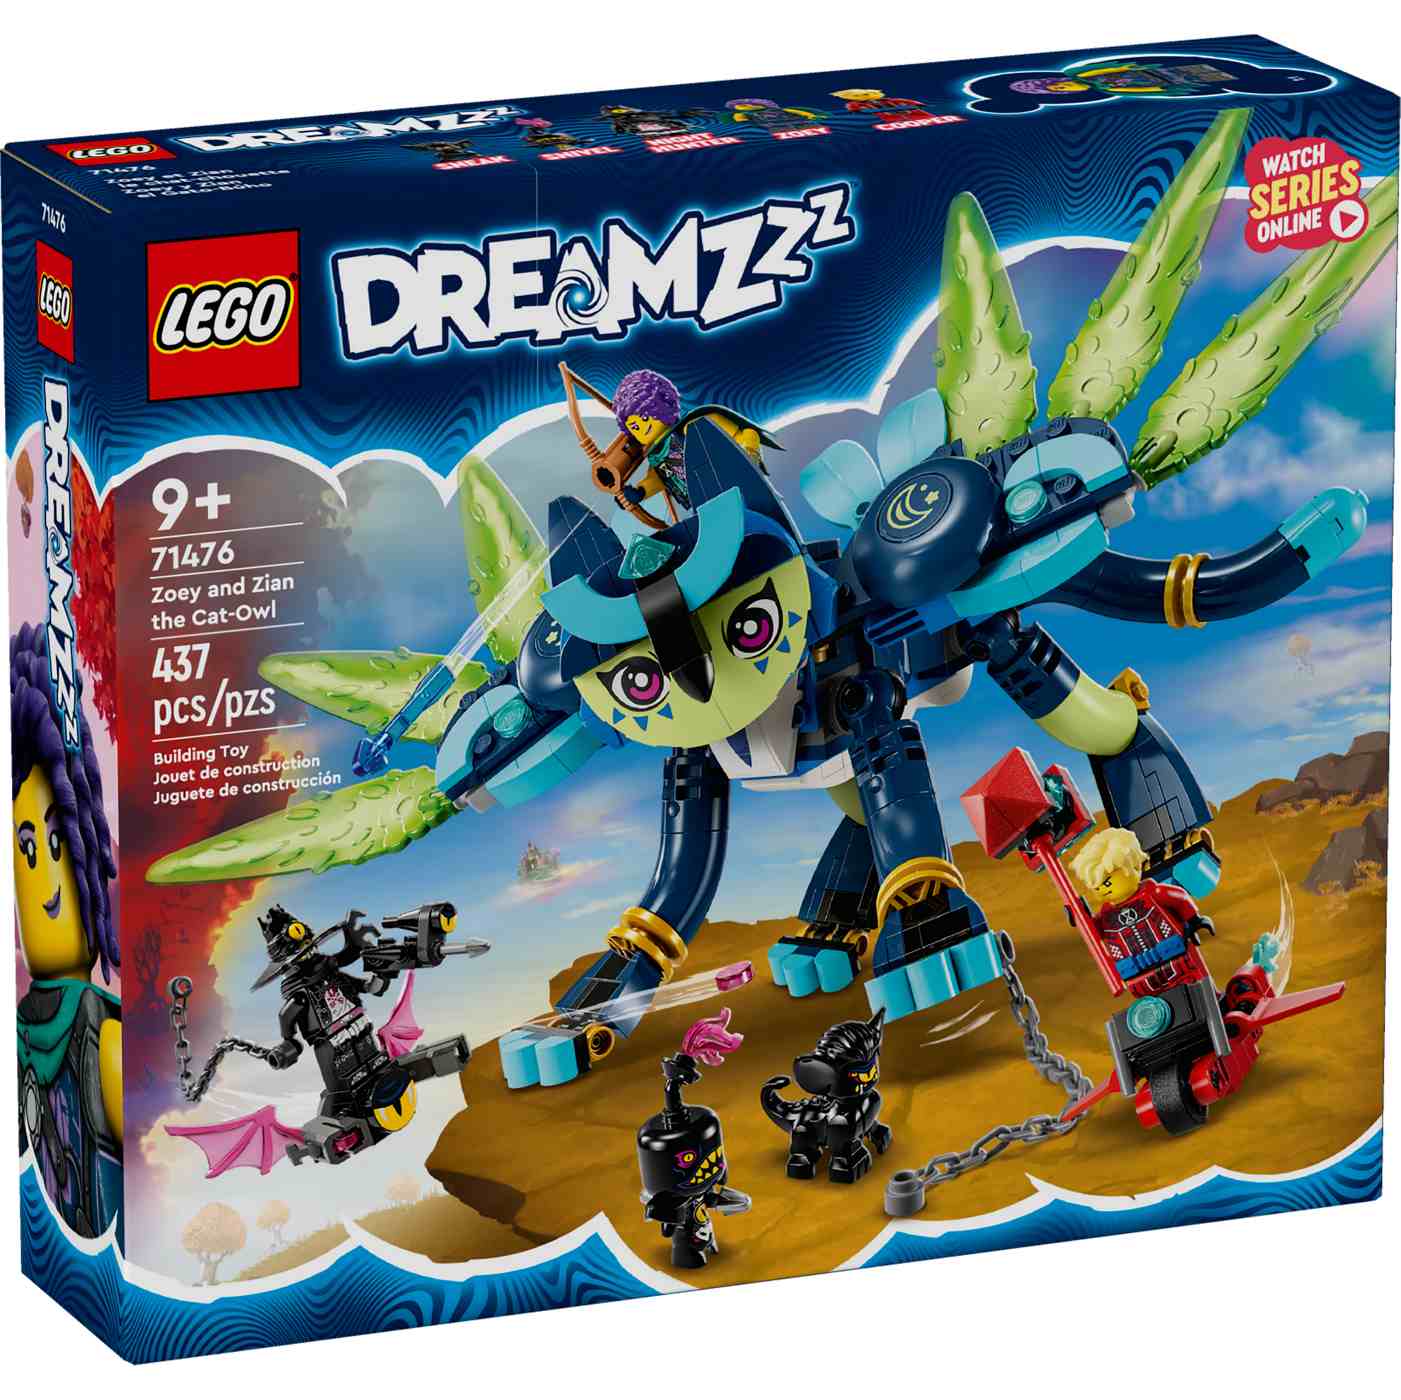 LEGO DREAMZzz Zoey & Zian the Cat-Owl Set; image 1 of 2